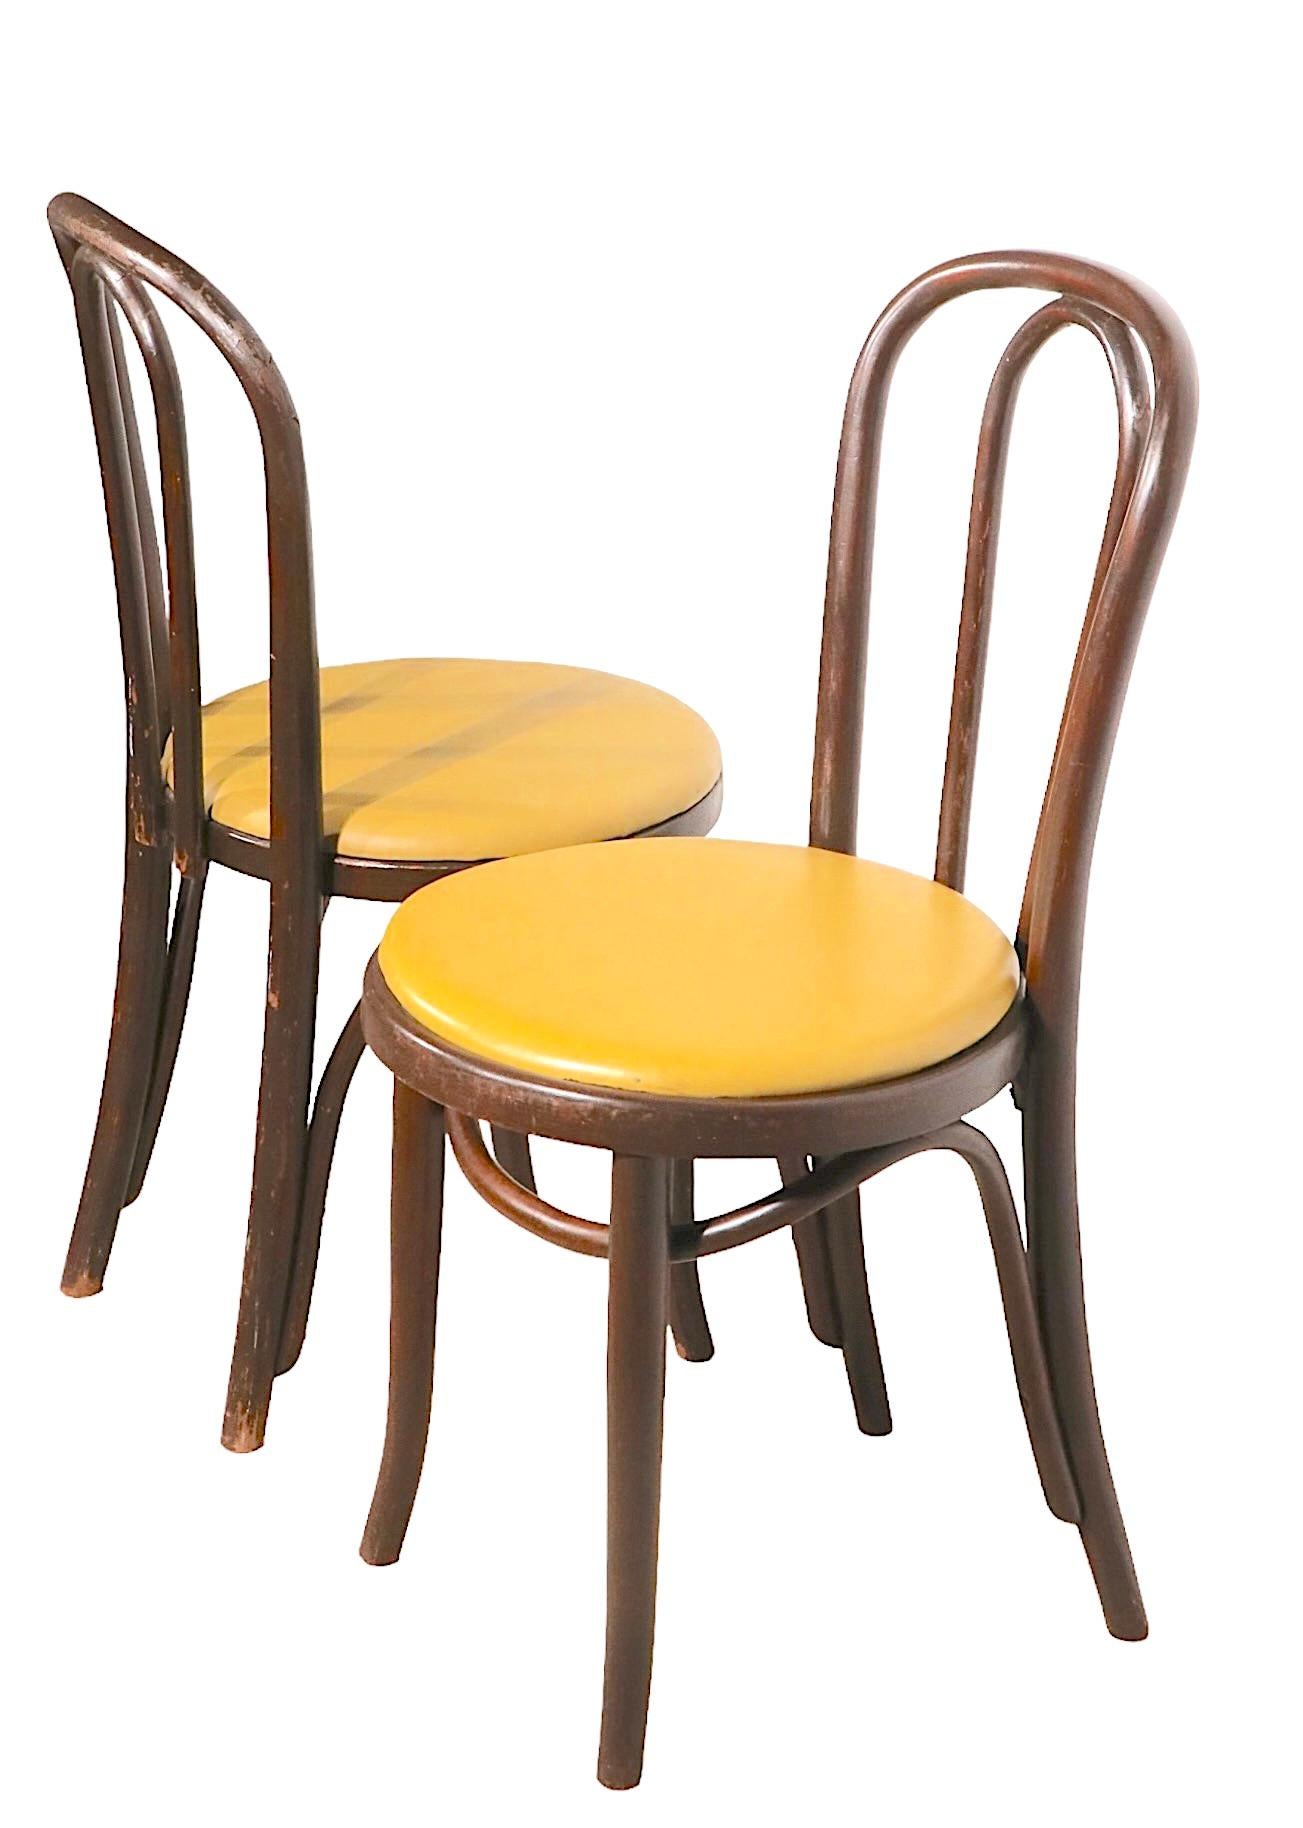 Austrian Pr. Bent Wood Bistro, Cafe Style Dining Chairs Att. to Thonet